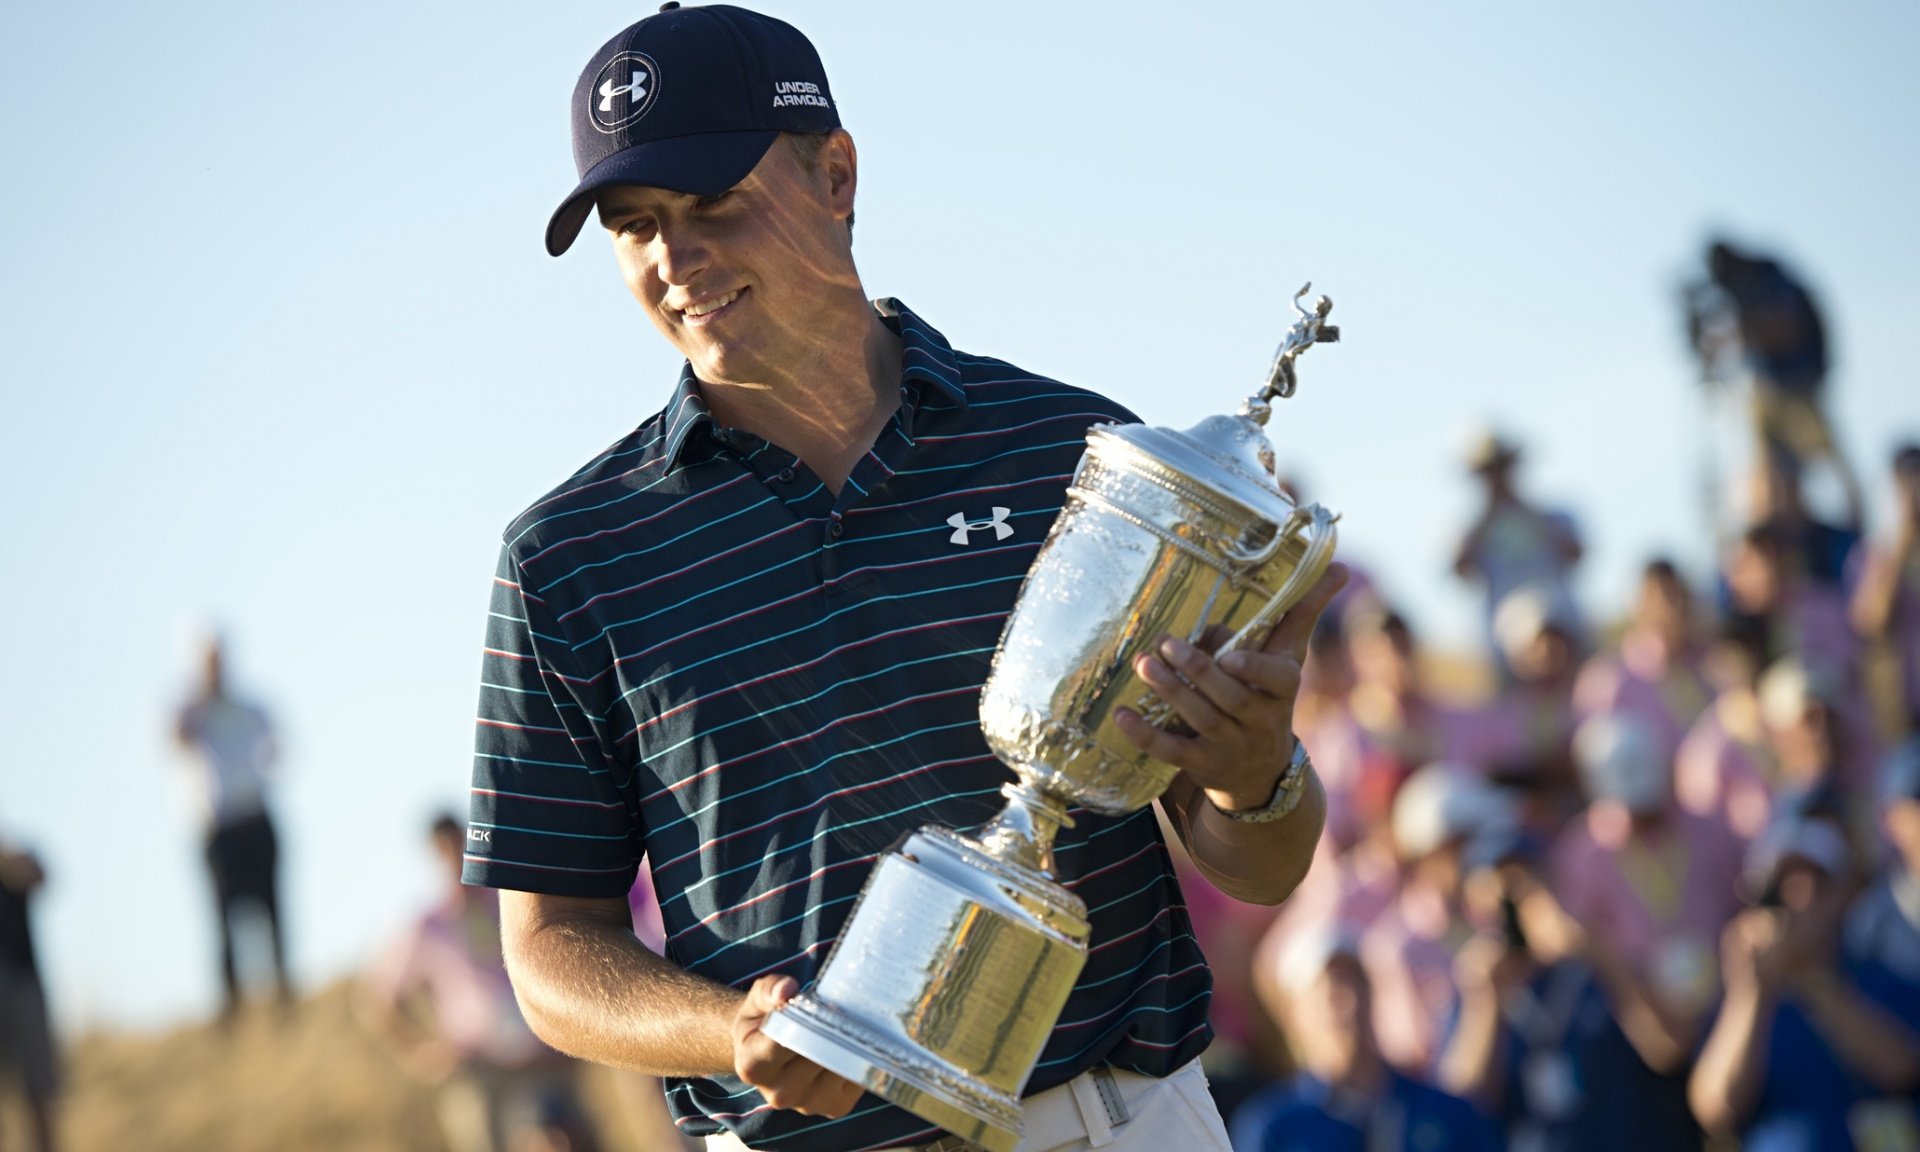 Jordan Spieth ready for Open hype but plays down Rory McIlroy rivalry